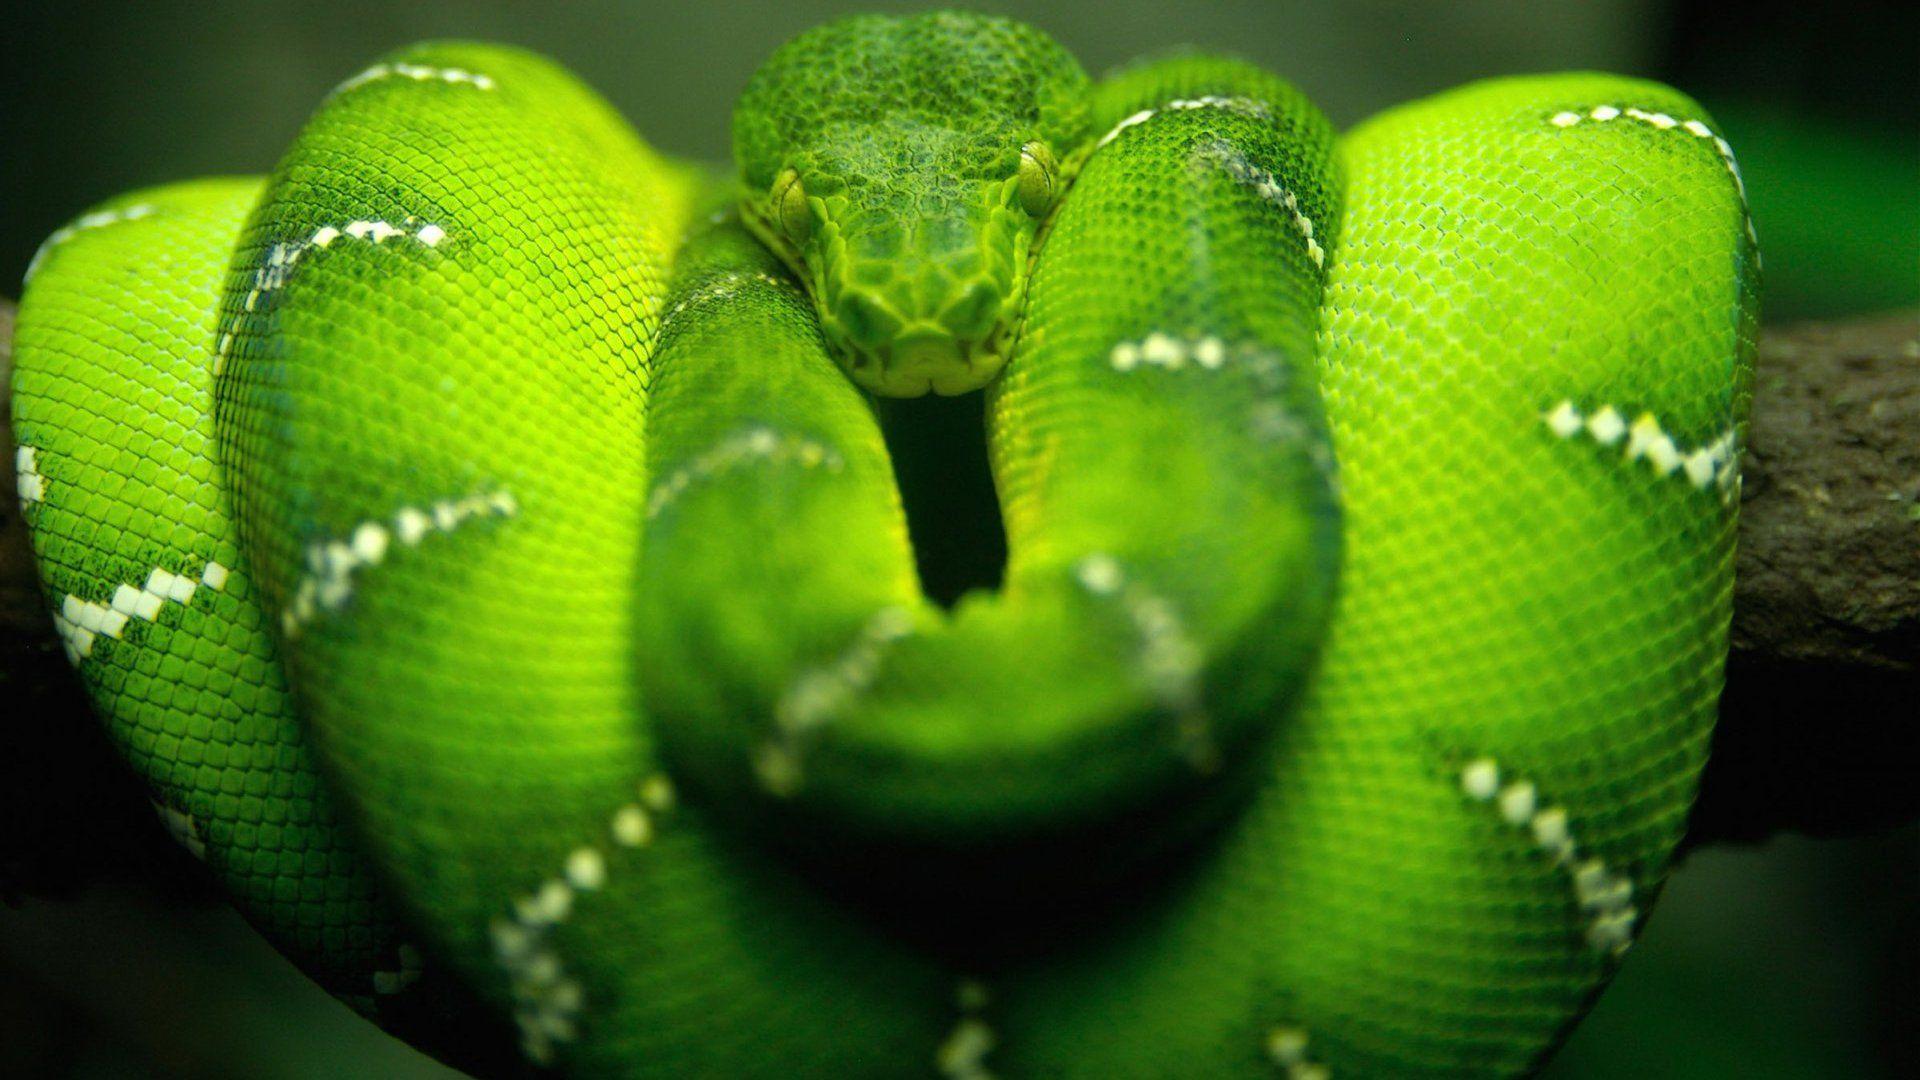 Download Green Snakes Wallpaper 1920x1080